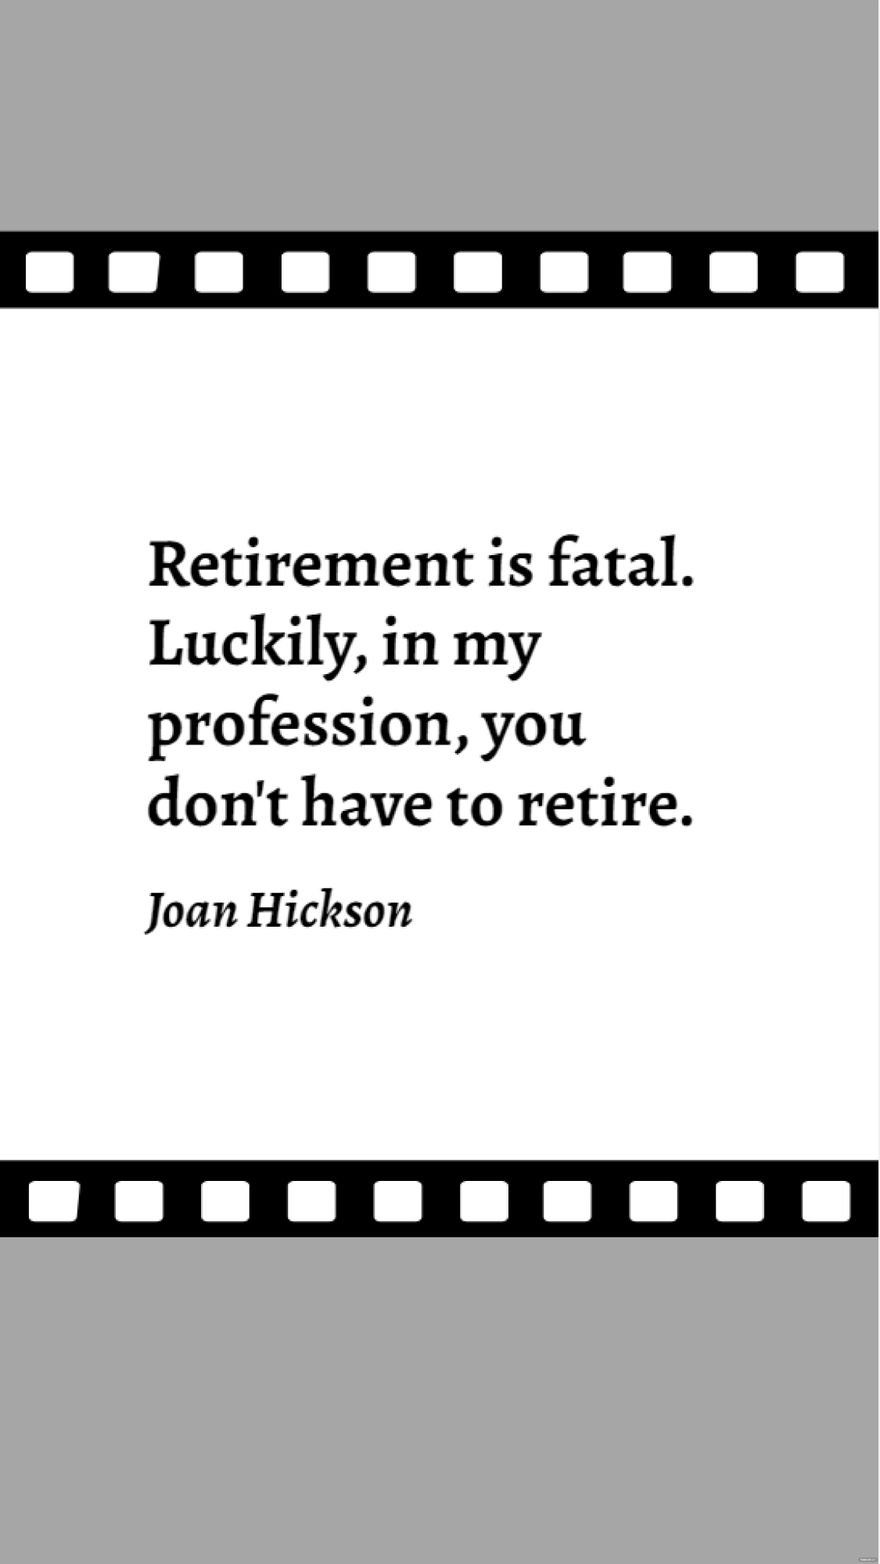 Free Joan Hickson - Retirement is fatal. Luckily, in my profession, you don't have to retire.